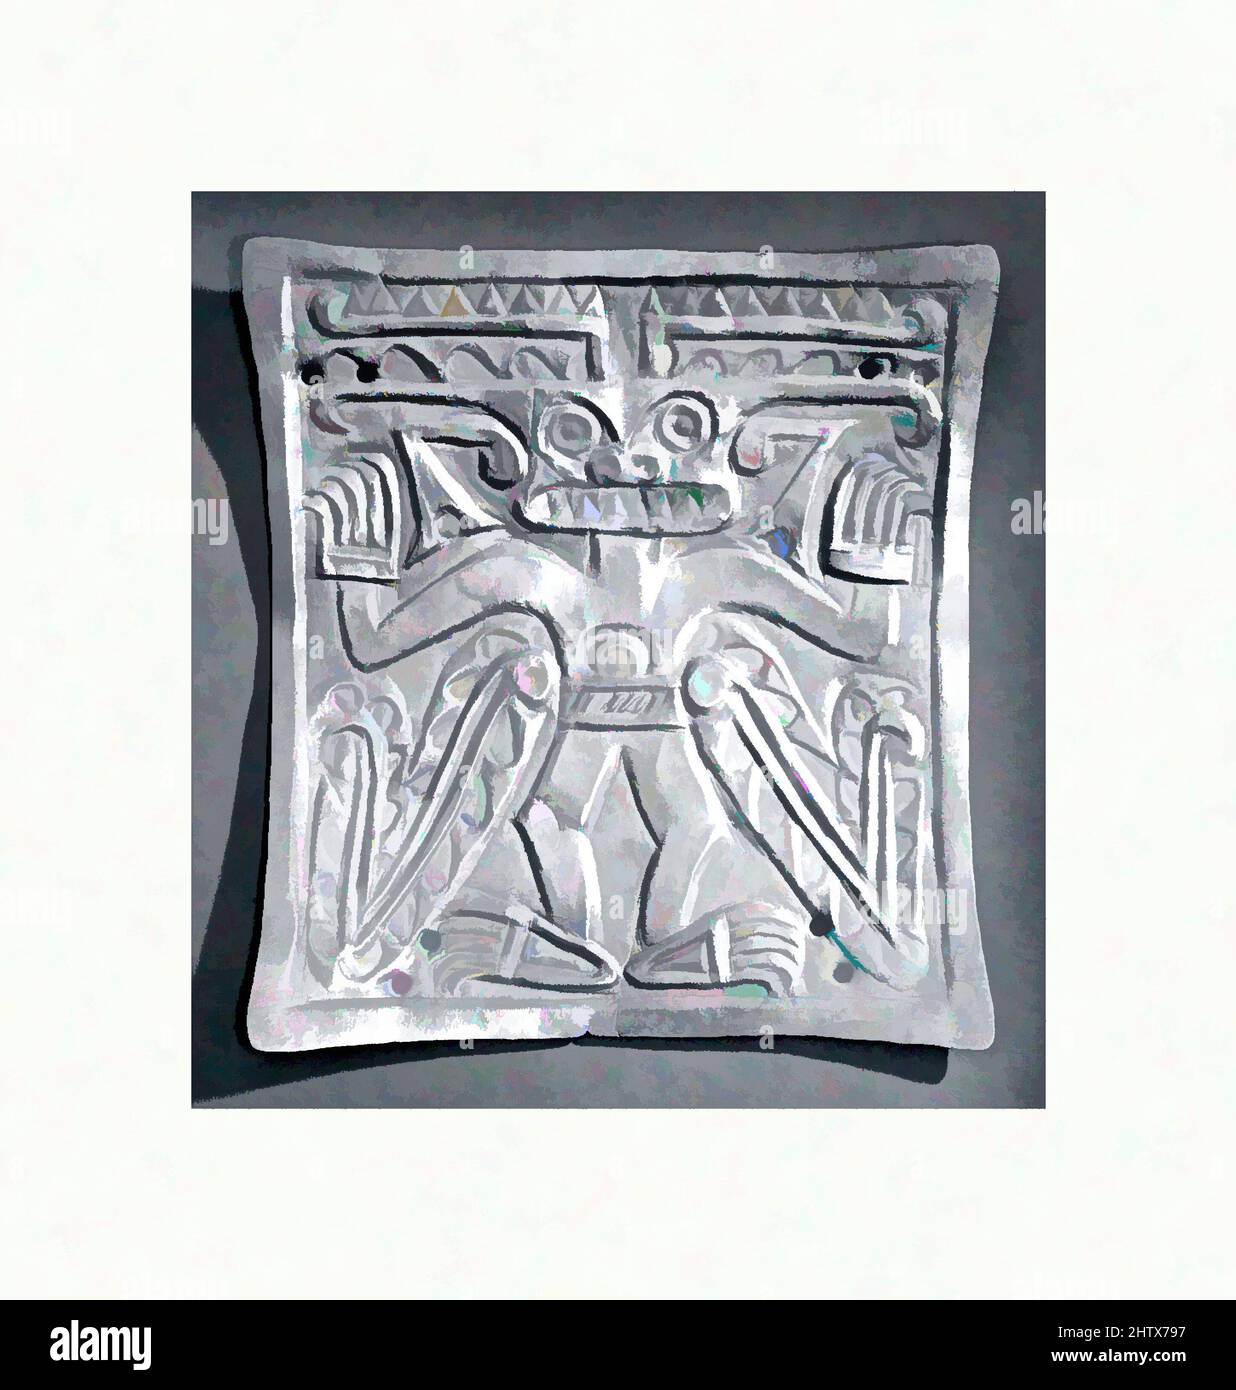 Art inspired by Plaque with Masked Figure, 8th–12th century, Panama, Cocle Province, Rio Parita region, Macaracas, Gold, Height 5 in., Metal-Ornaments, Classic works modernized by Artotop with a splash of modernity. Shapes, color and value, eye-catching visual impact on art. Emotions through freedom of artworks in a contemporary way. A timeless message pursuing a wildly creative new direction. Artists turning to the digital medium and creating the Artotop NFT Stock Photo